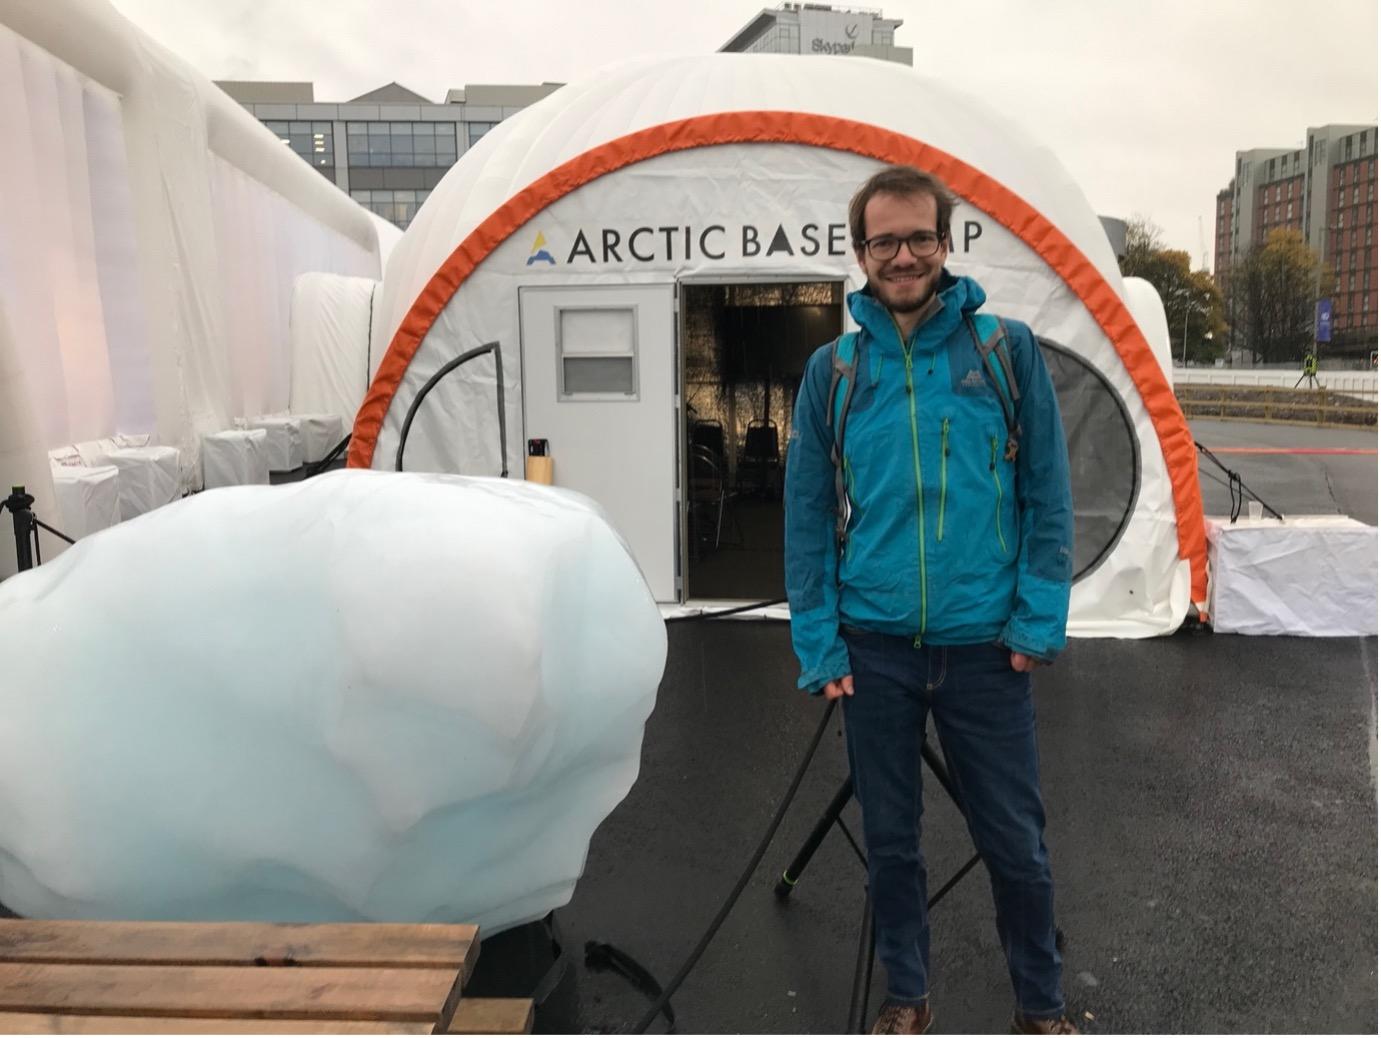 Dr Erik Mackie stands next to a large chunk of ice outside COP26's arctic basecamp.